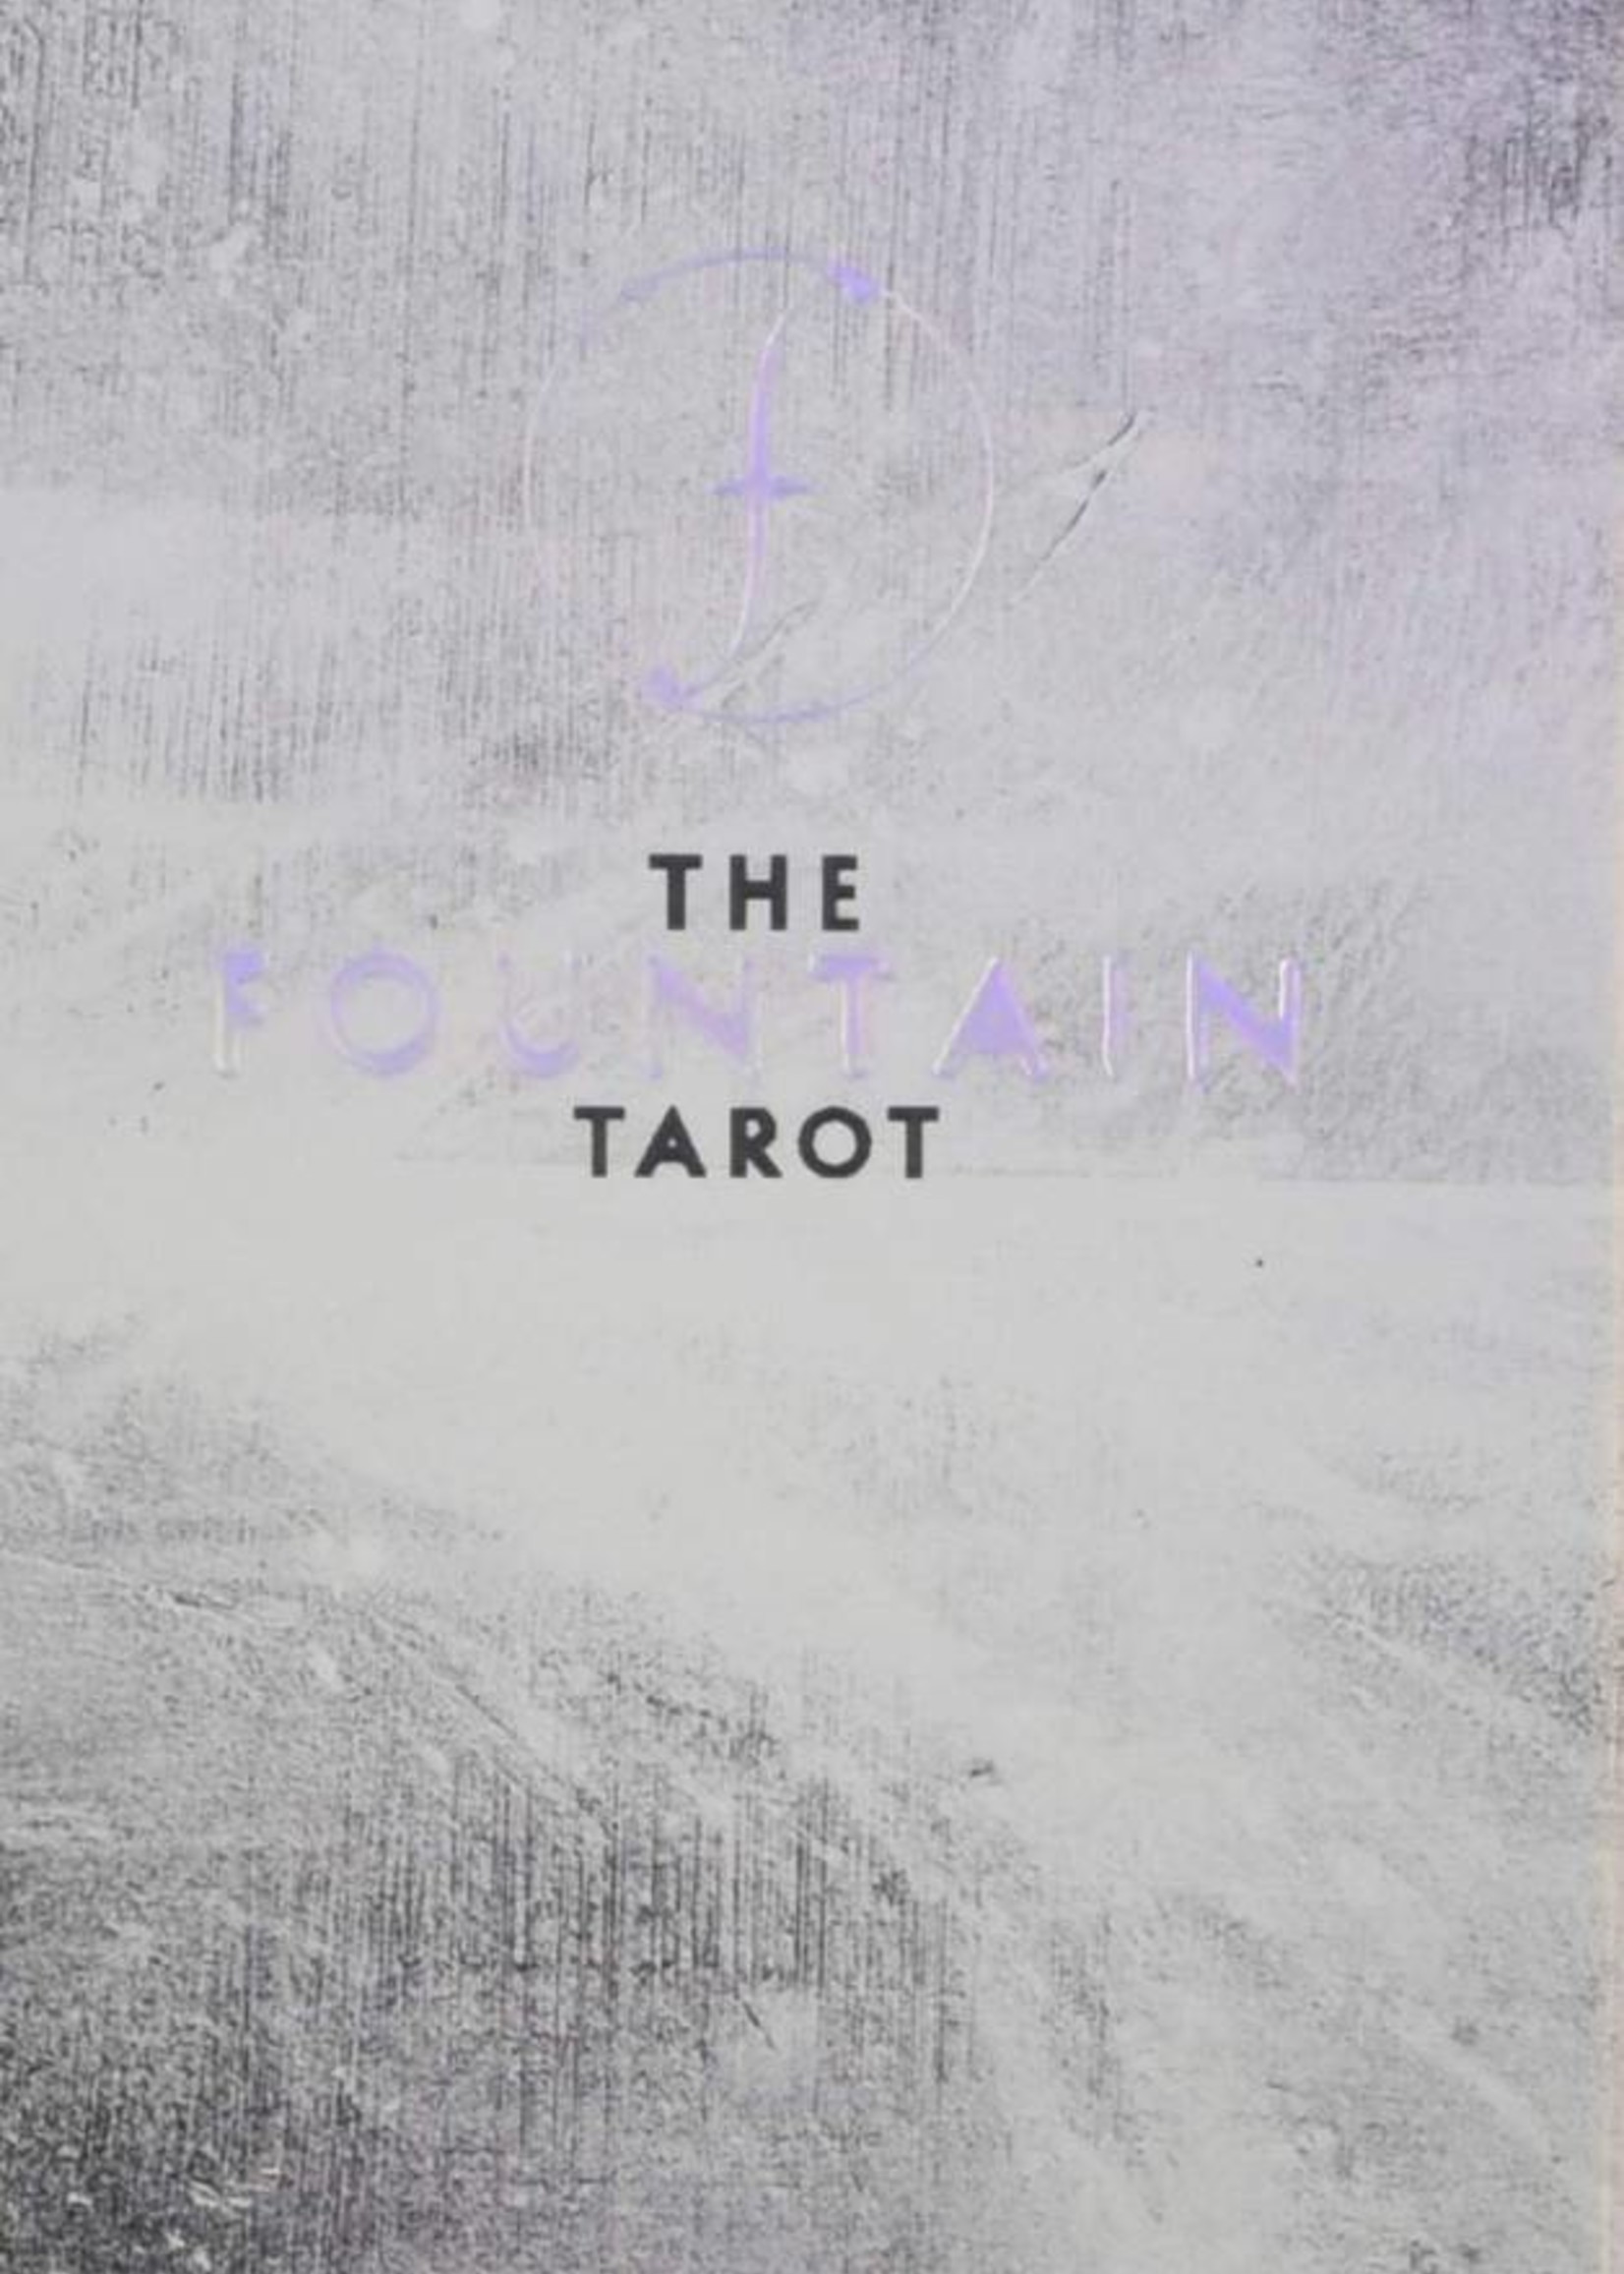 The Fountain Tarot | Illustrated Deck and Guidebook